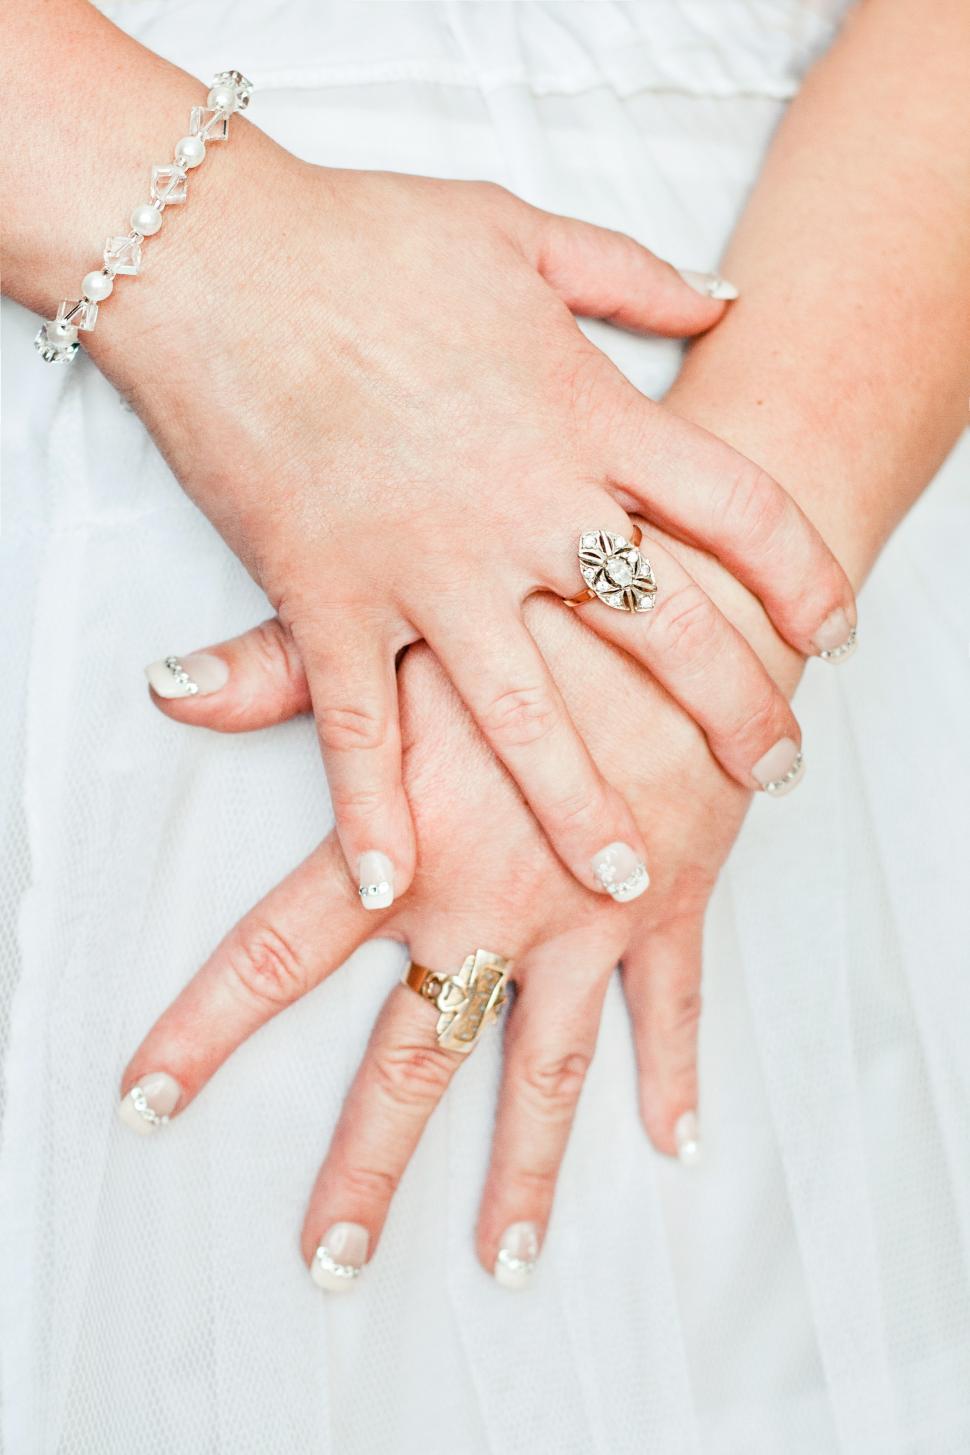 Free Image of Close Up of Person Wearing Wedding Ring 